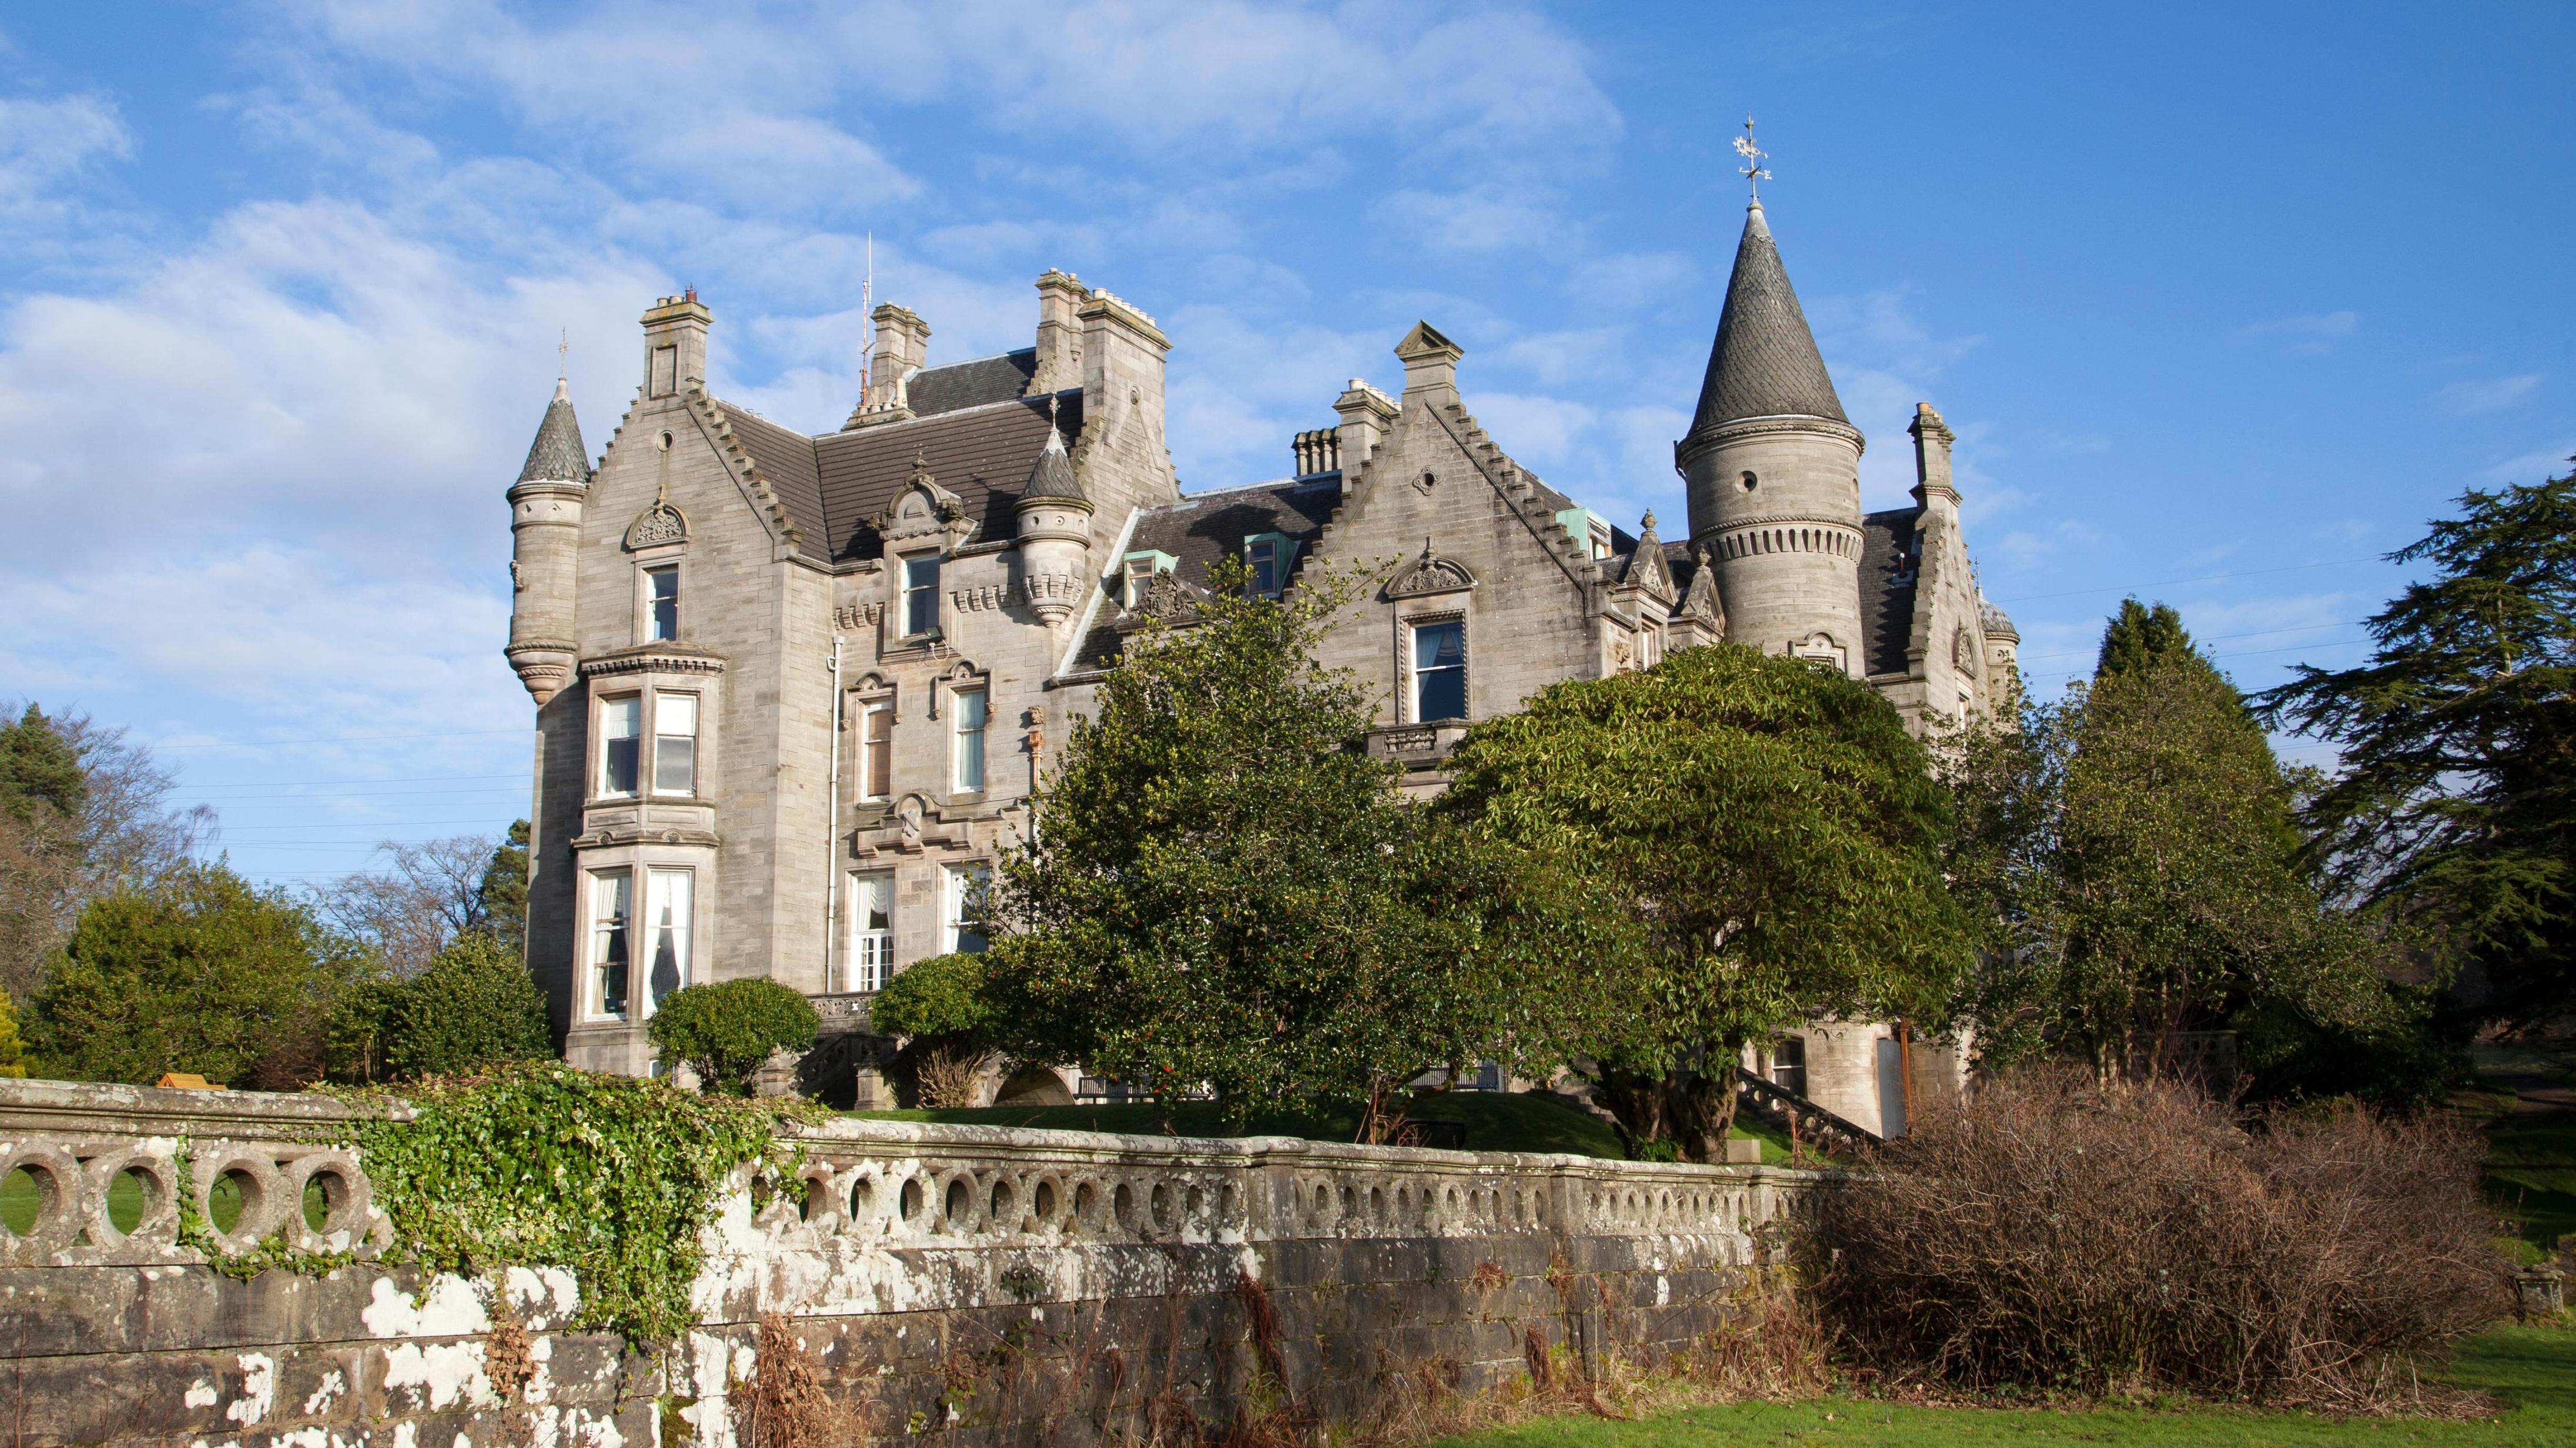 Overtoun House was built in 1862 and gifted to the people of Dumbarton in 1938